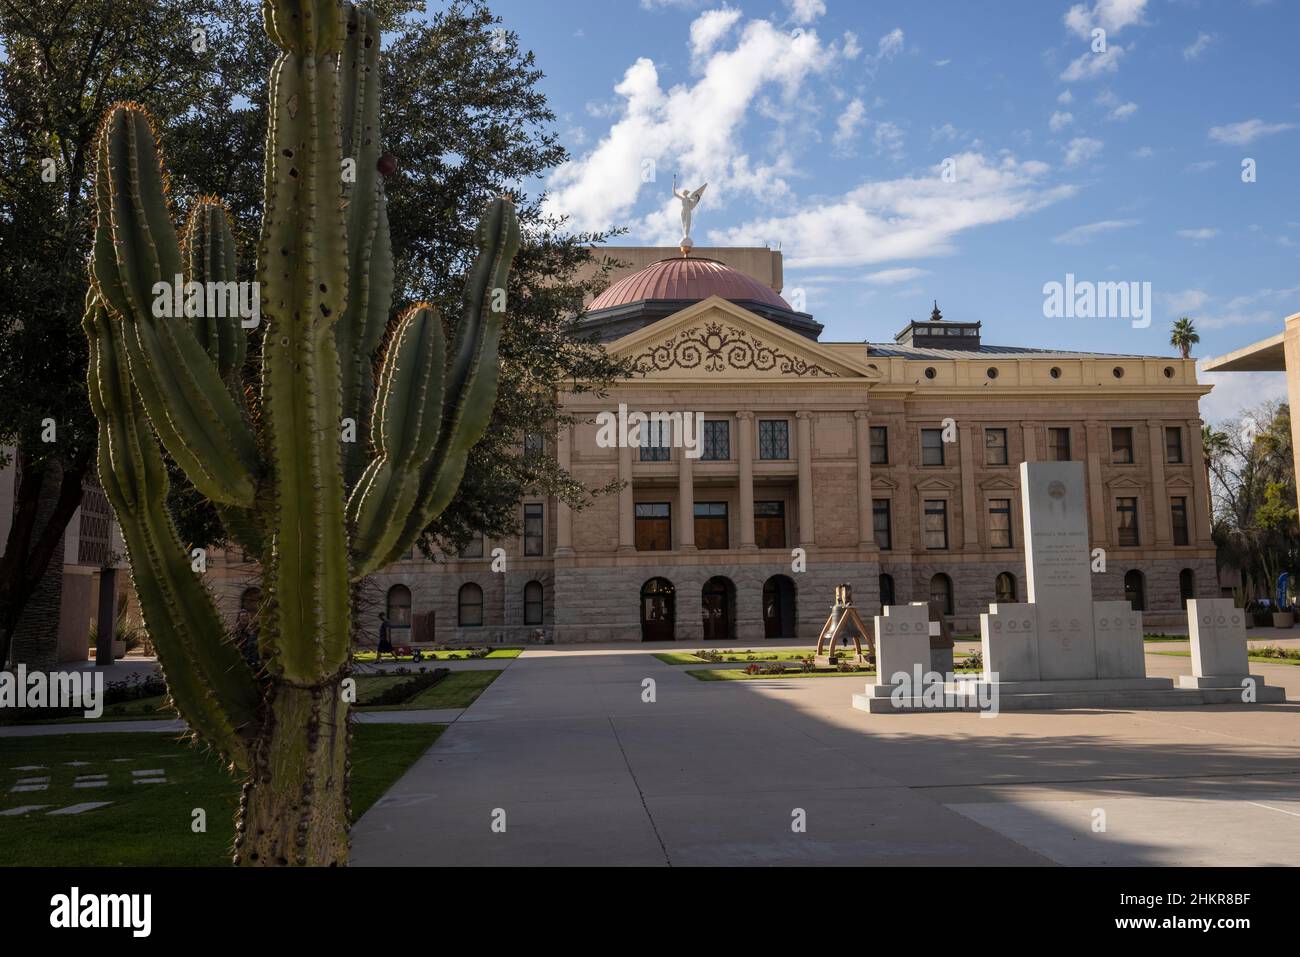 The Arizona State Capitol in Phoenix, Arizona, United States.The Capitol is now maintained as the Arizona Capitol Museum. Stock Photo